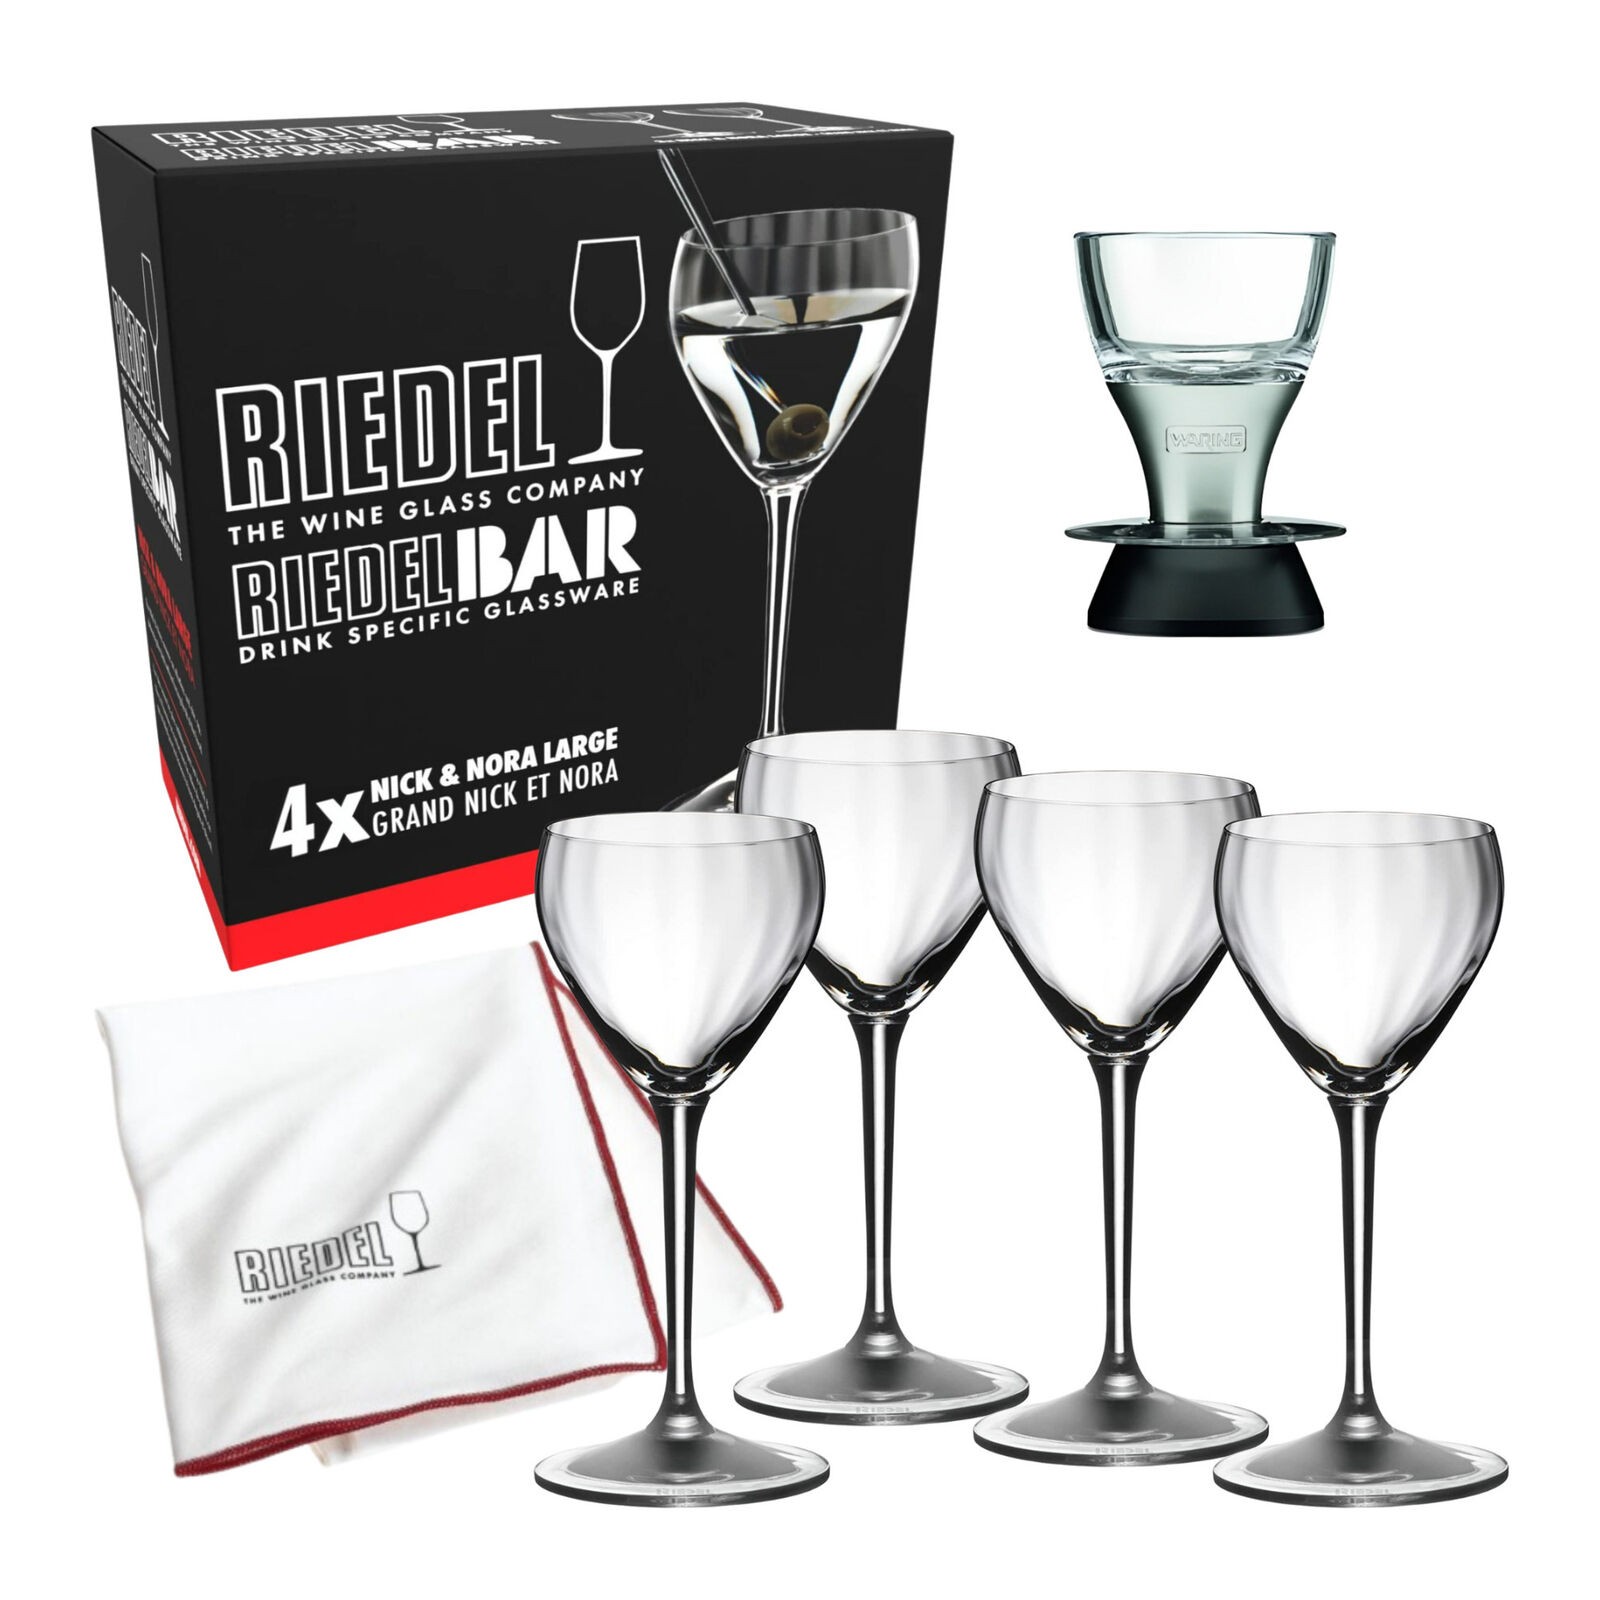 Riedel Specific Nick and Nora Large Glassware 4-Pack with Polishing Cloth Bundle